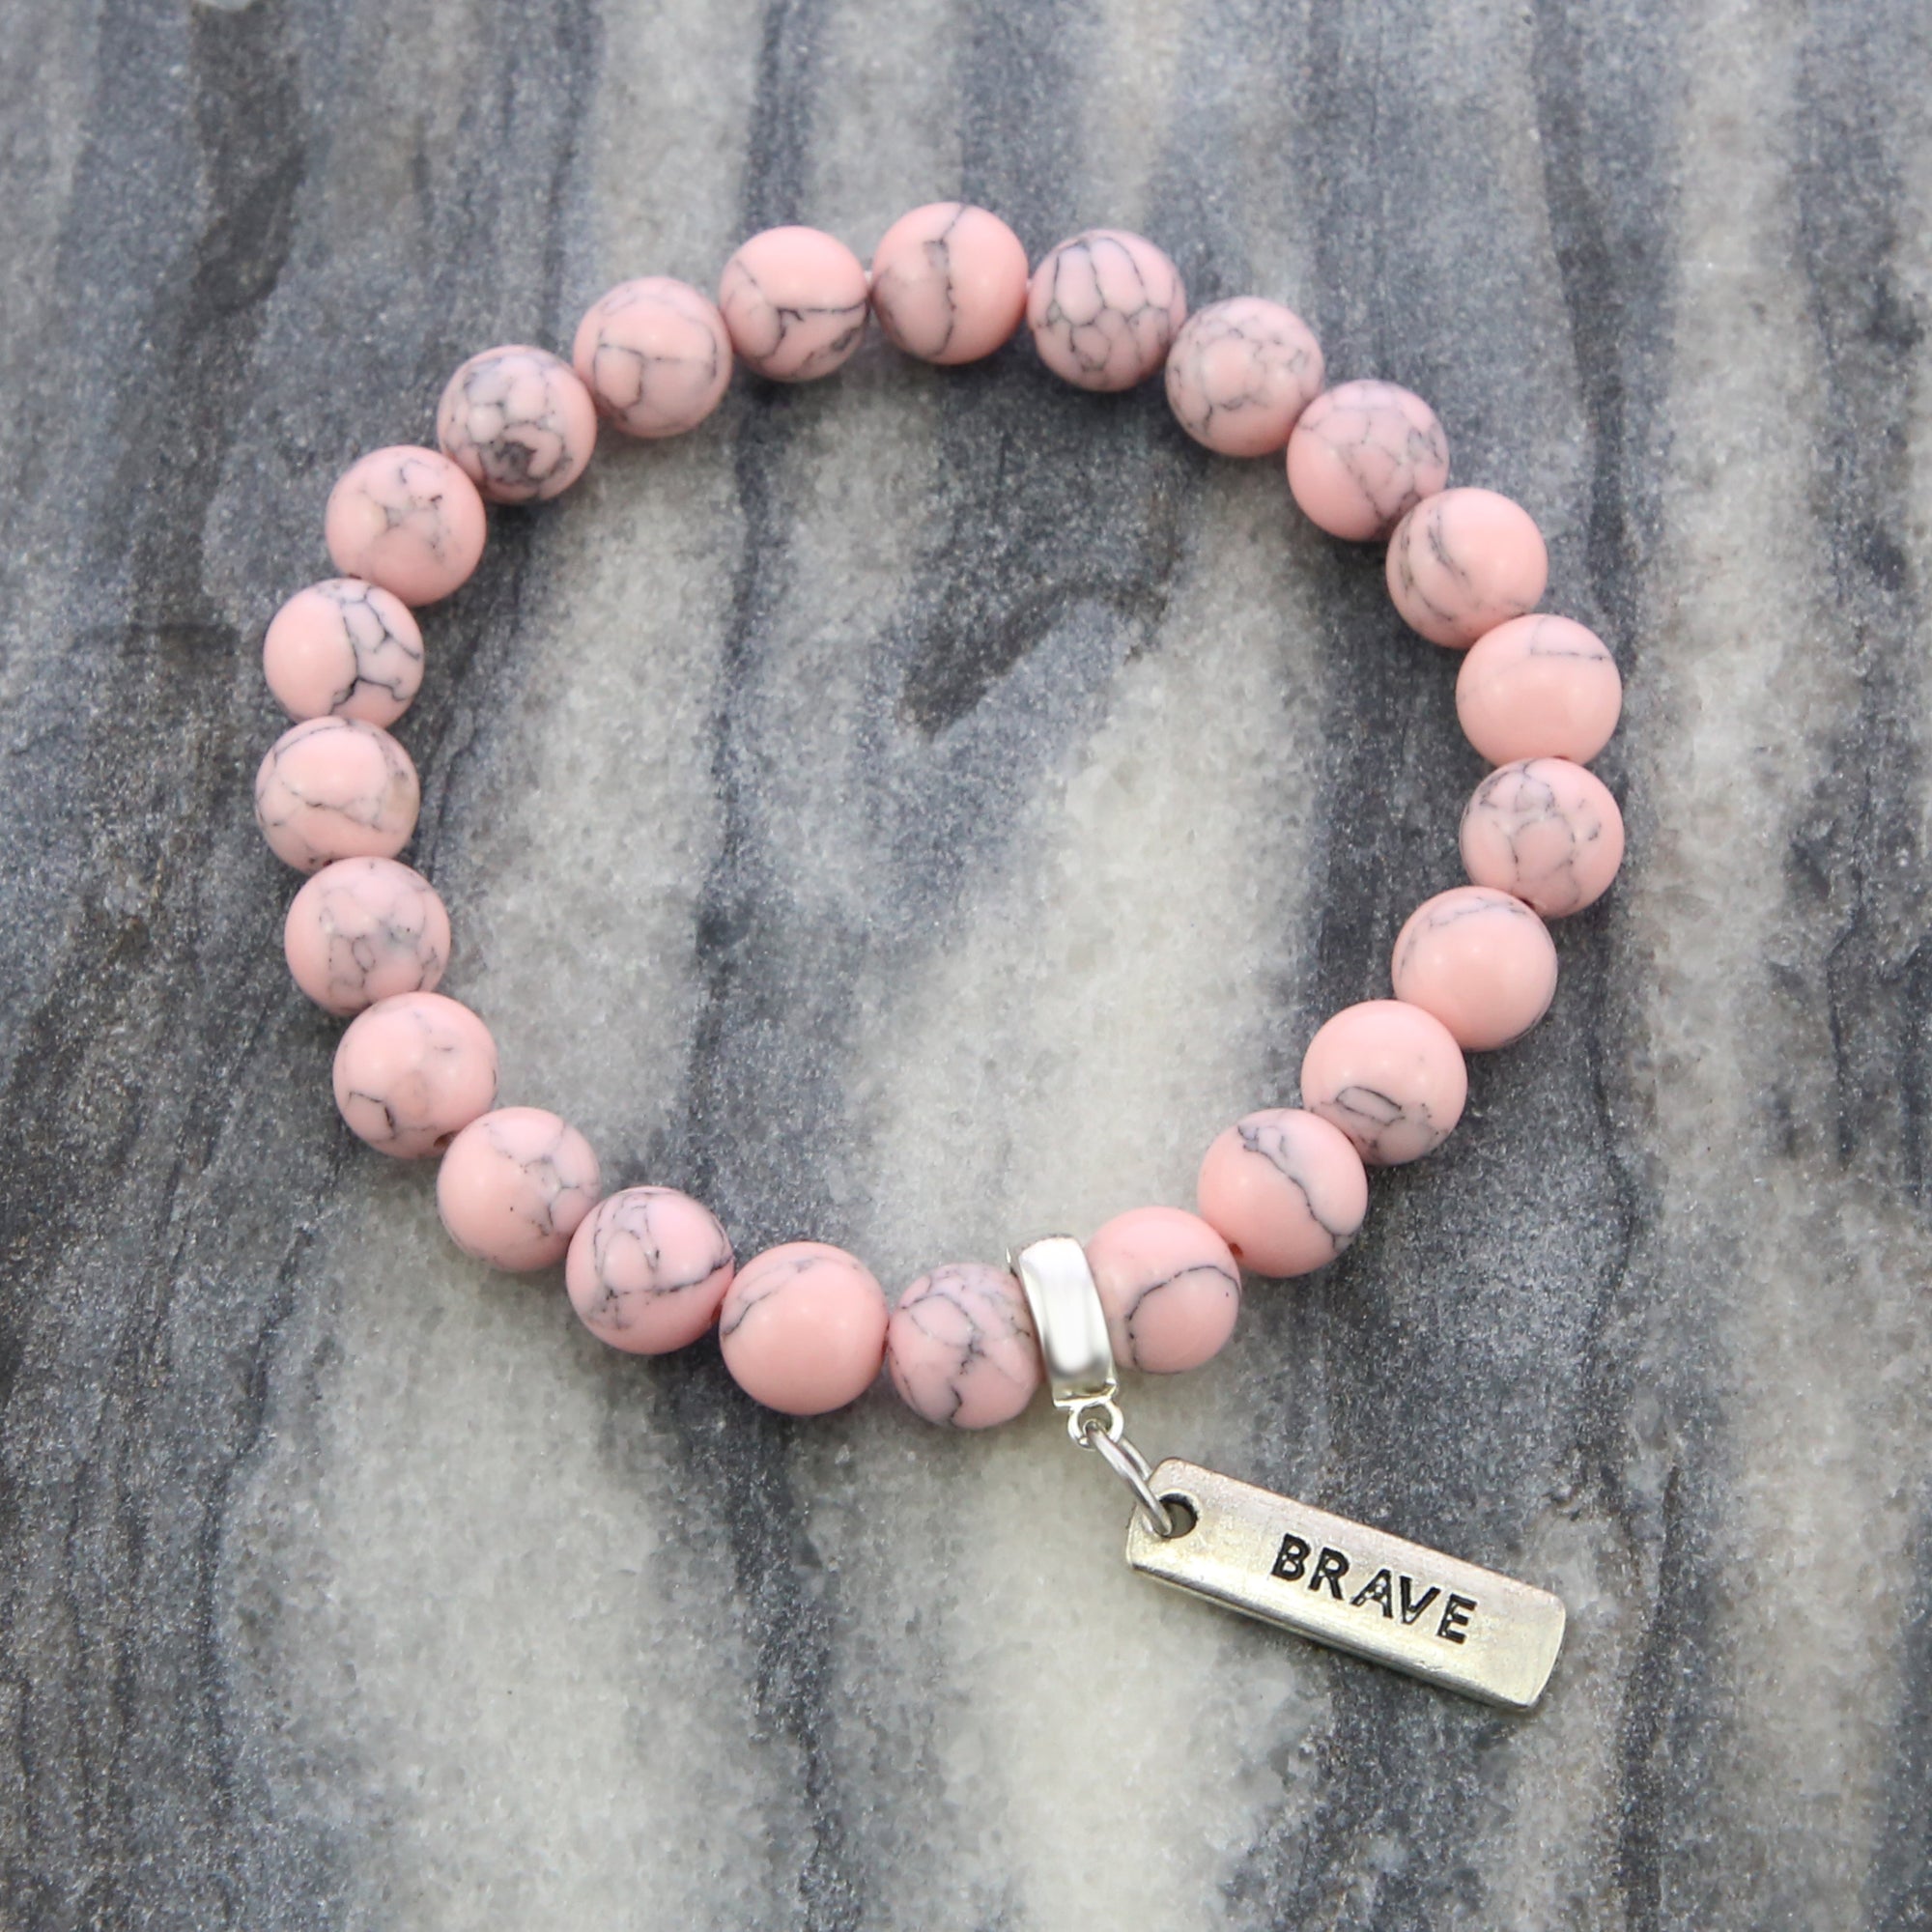 Stone Bracelet - Soft Pink Marbled 8mm Beads - with Silver Word Charm